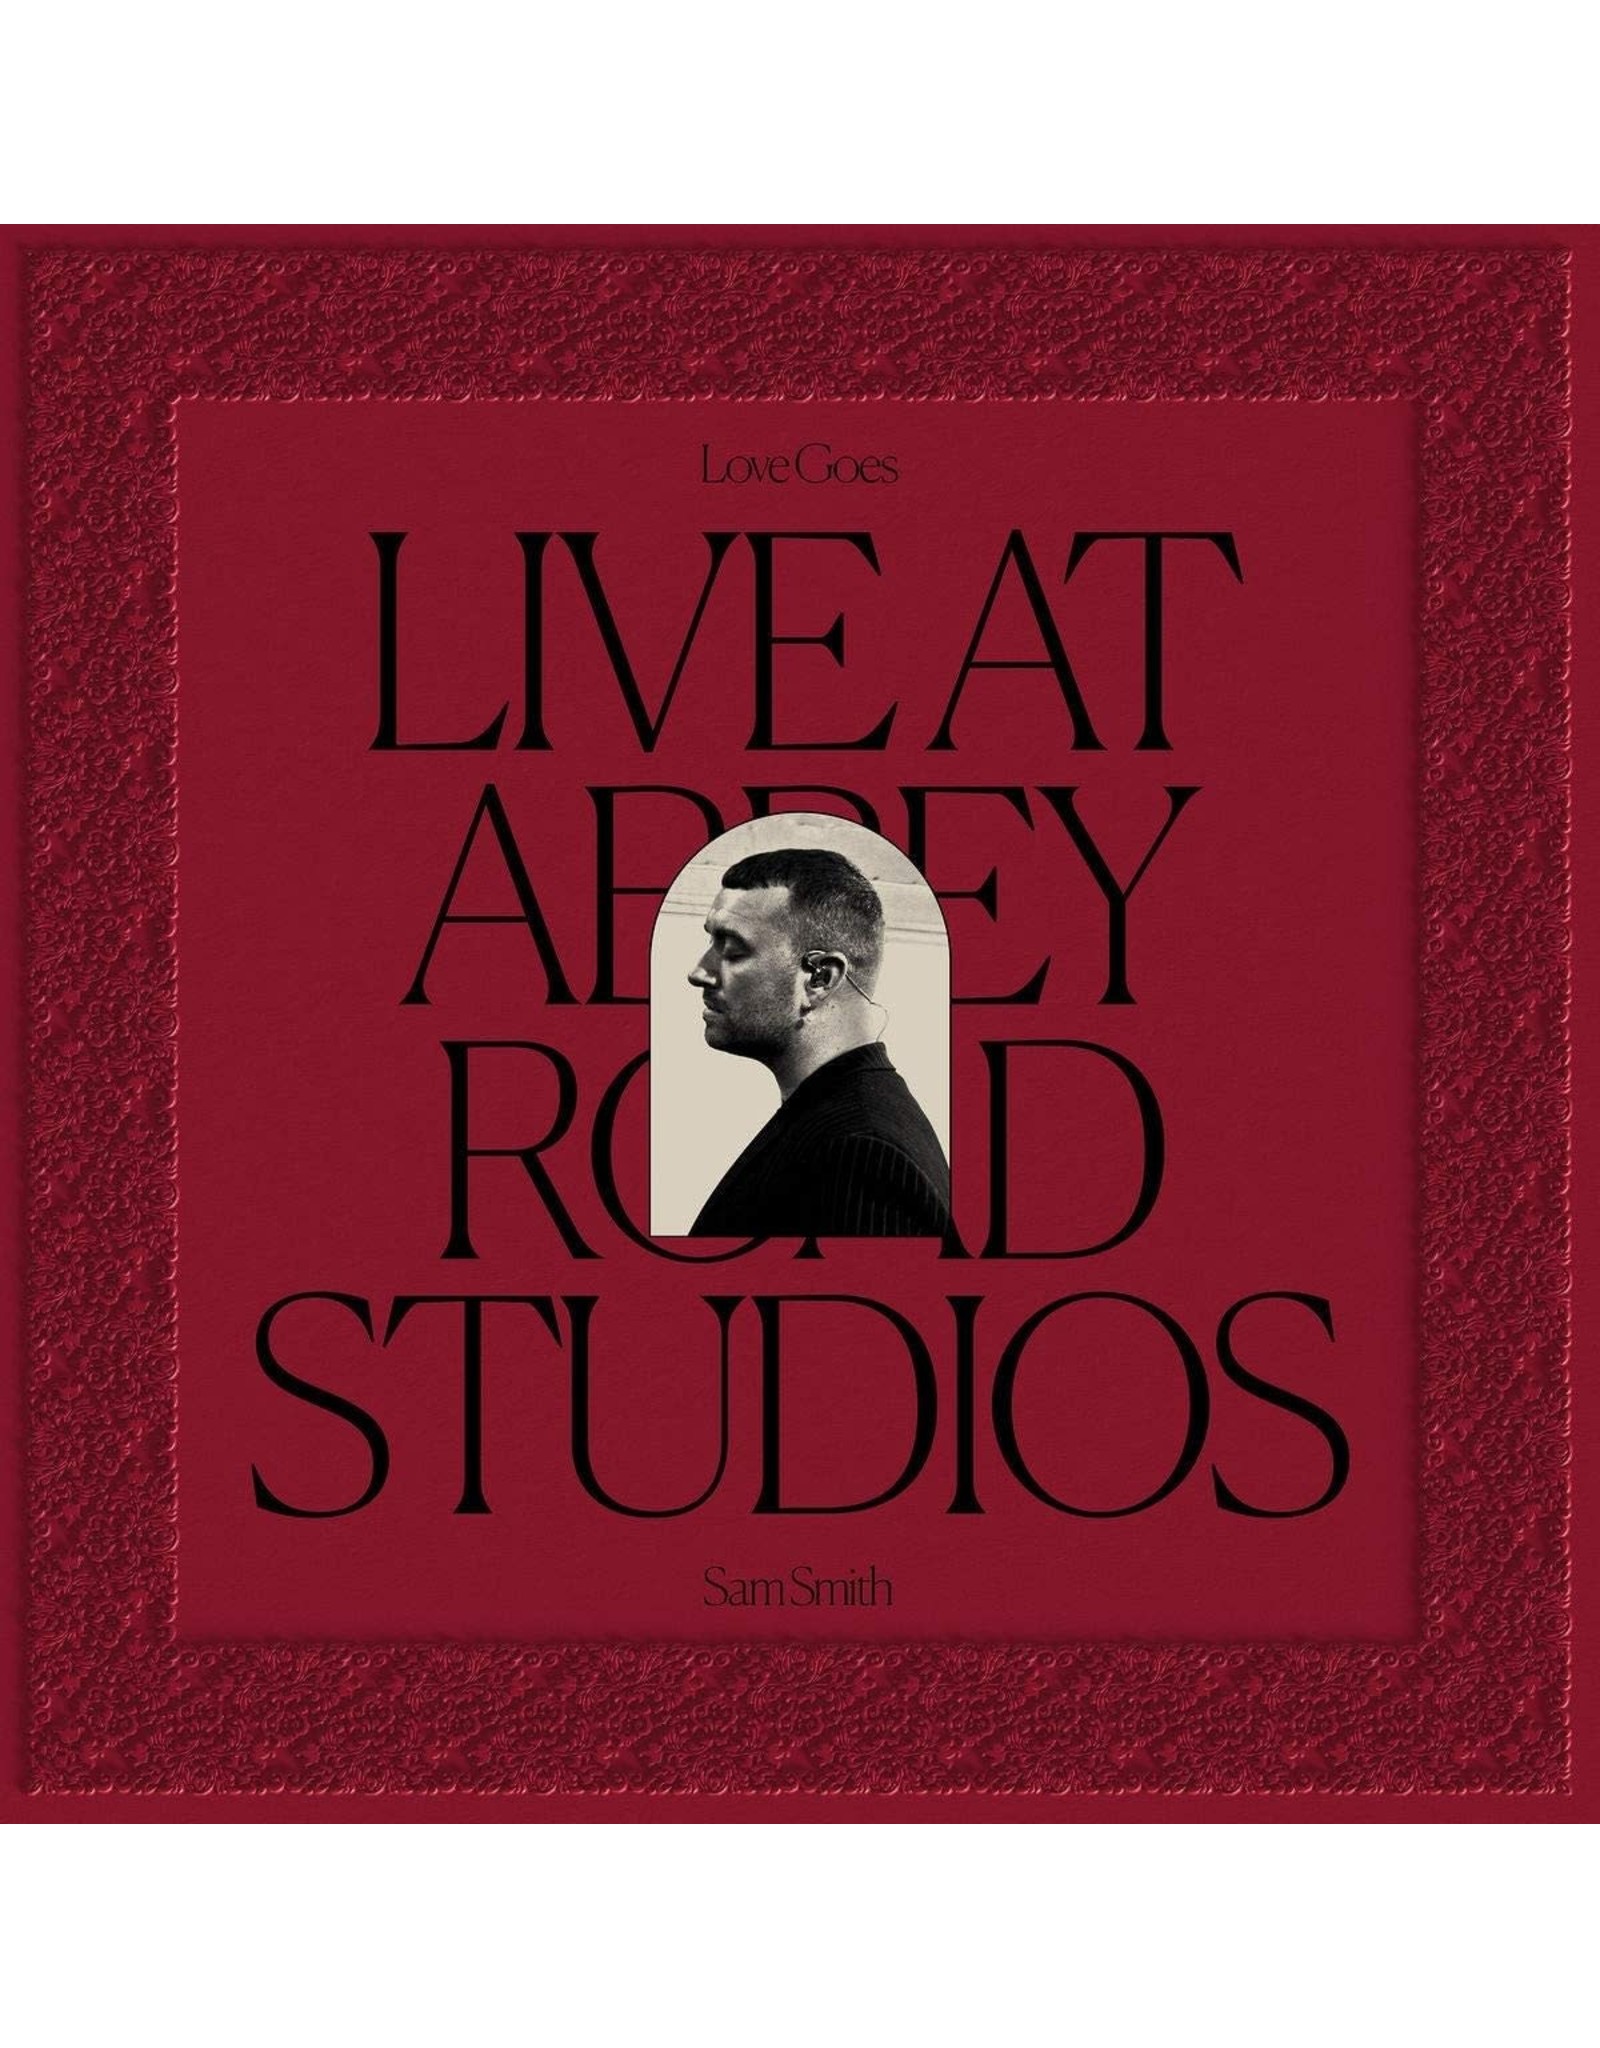 Sam Smith - Love Goes: Live at Abbey Road Studios